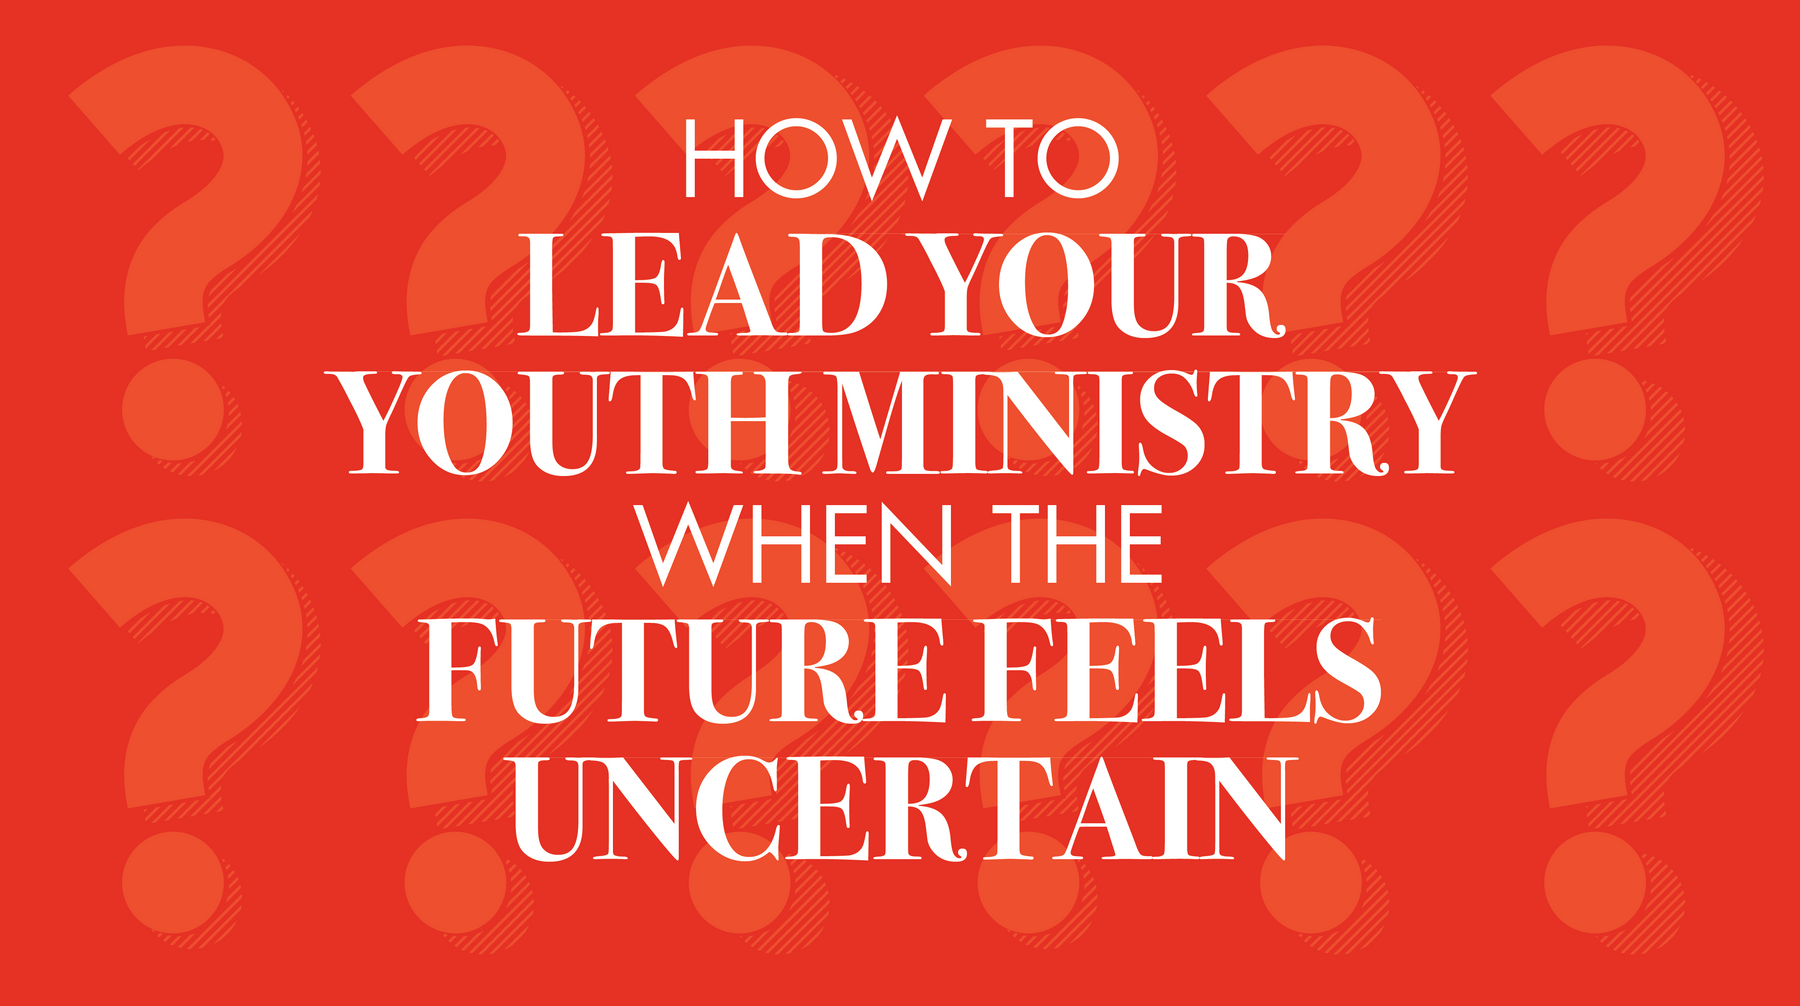 How To Lead Your Youth Ministry When The Future Feels Uncertain